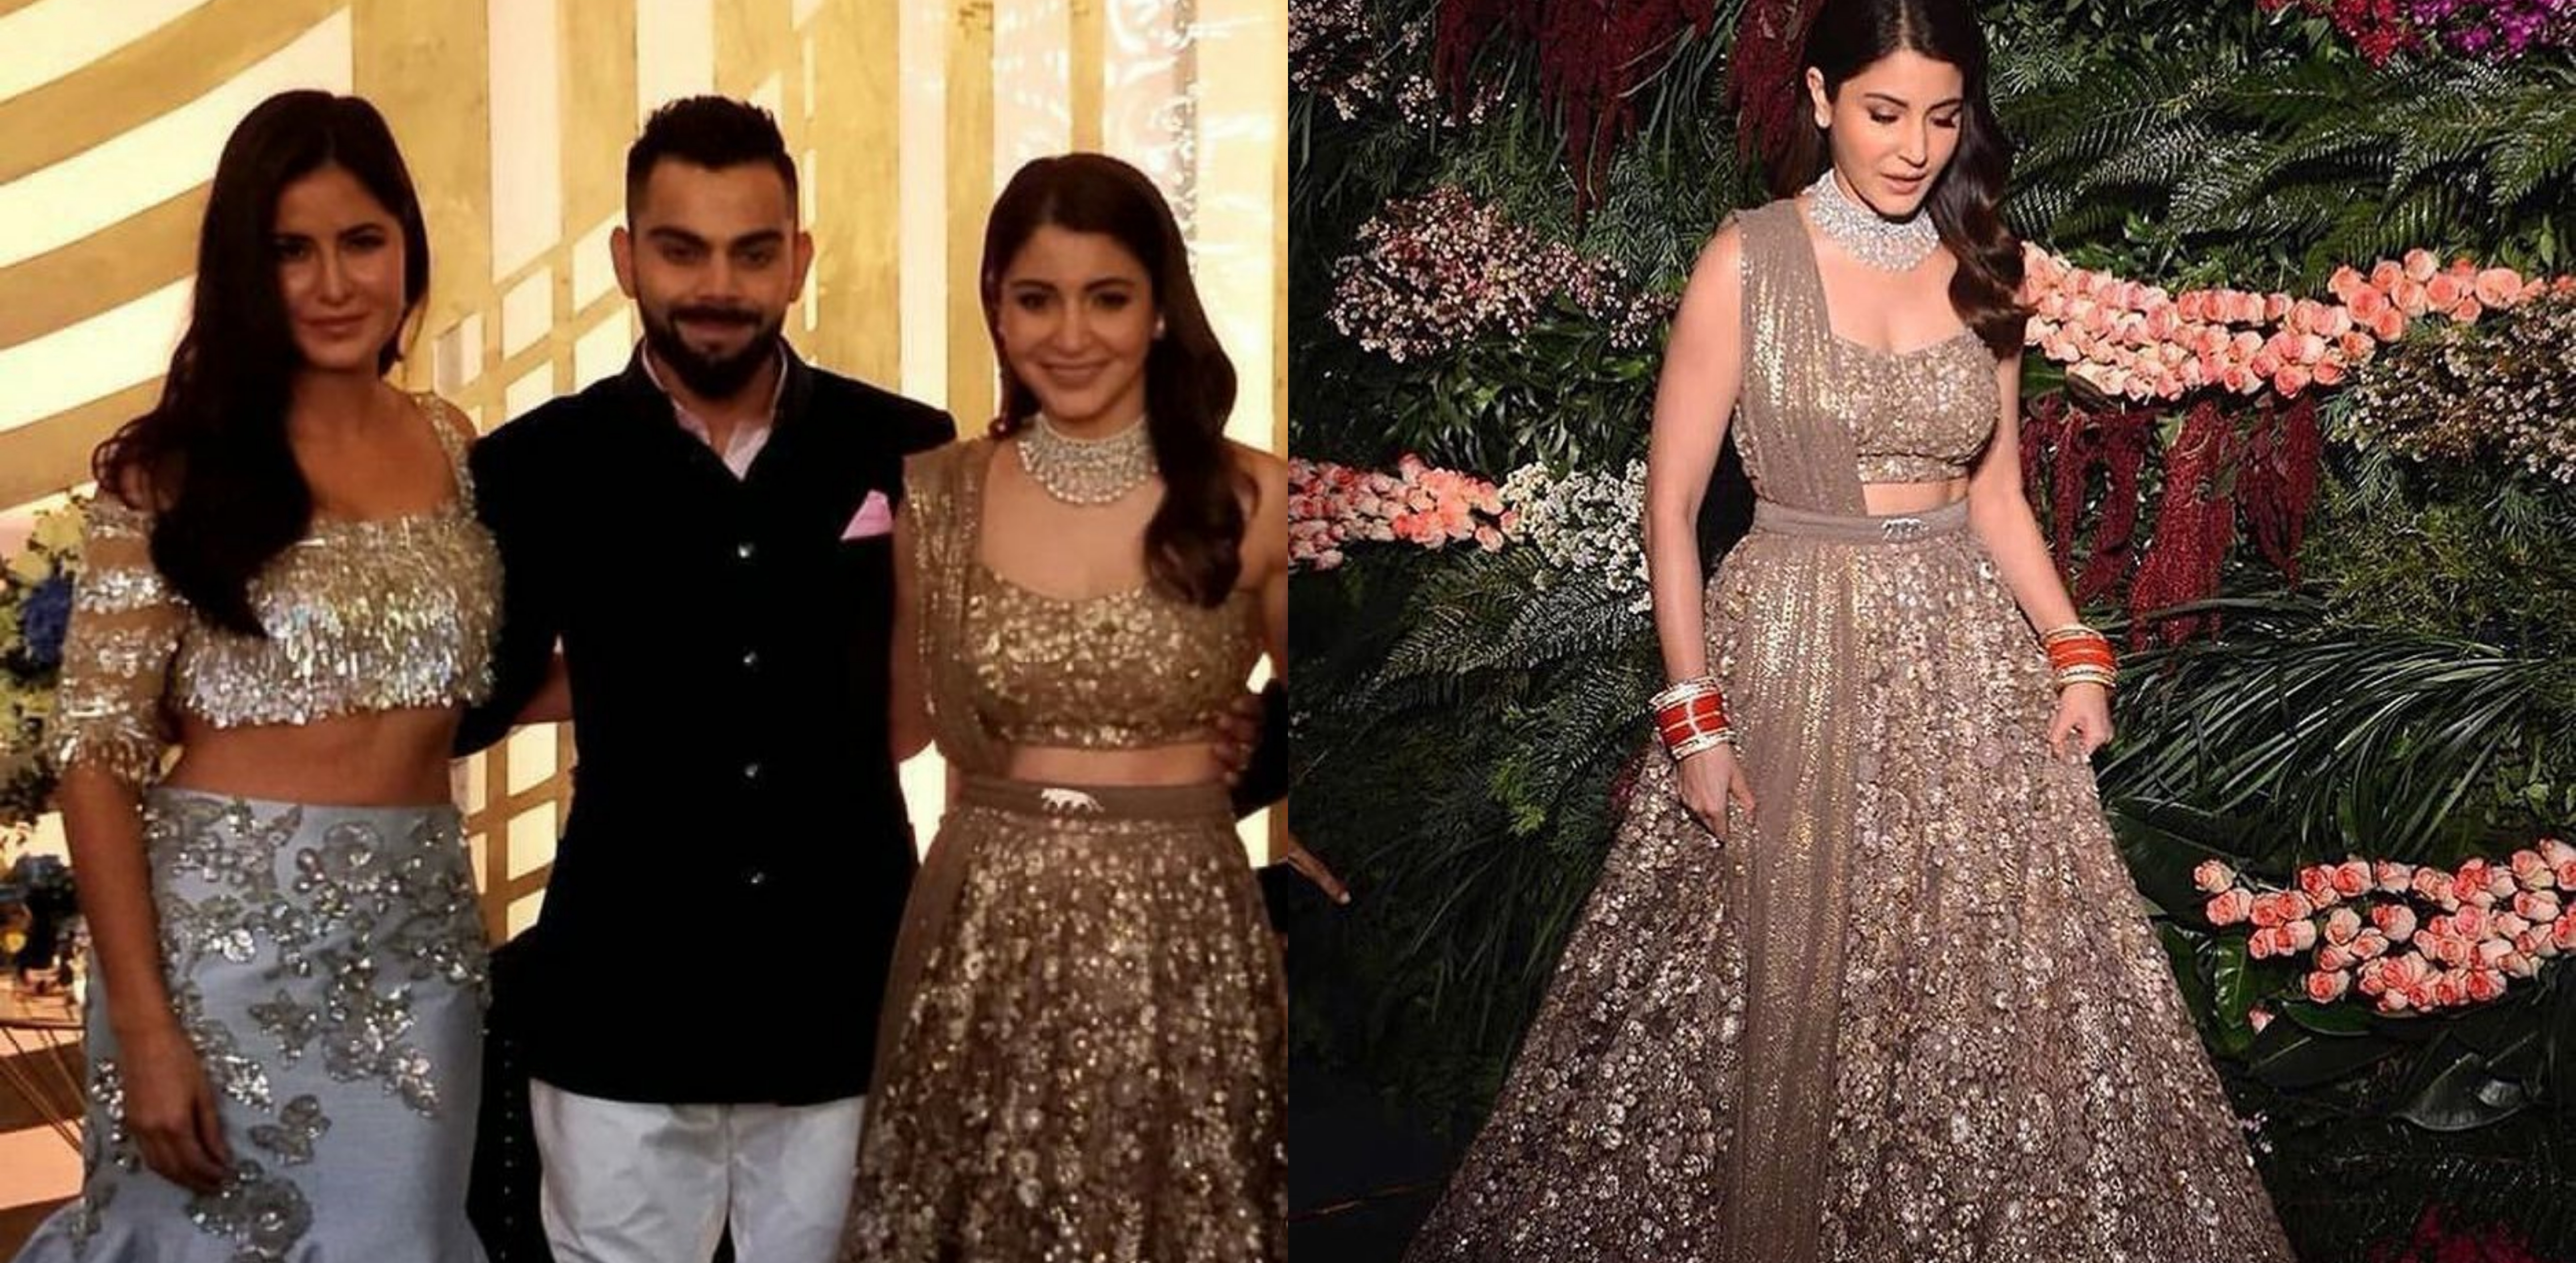 Anushka Sharma looks exquisite at her wedding receptions as she turns muse  for designer Sabyasachi - Bollywood News & Gossip, Movie Reviews, Trailers  & Videos at Bollywoodlife.com